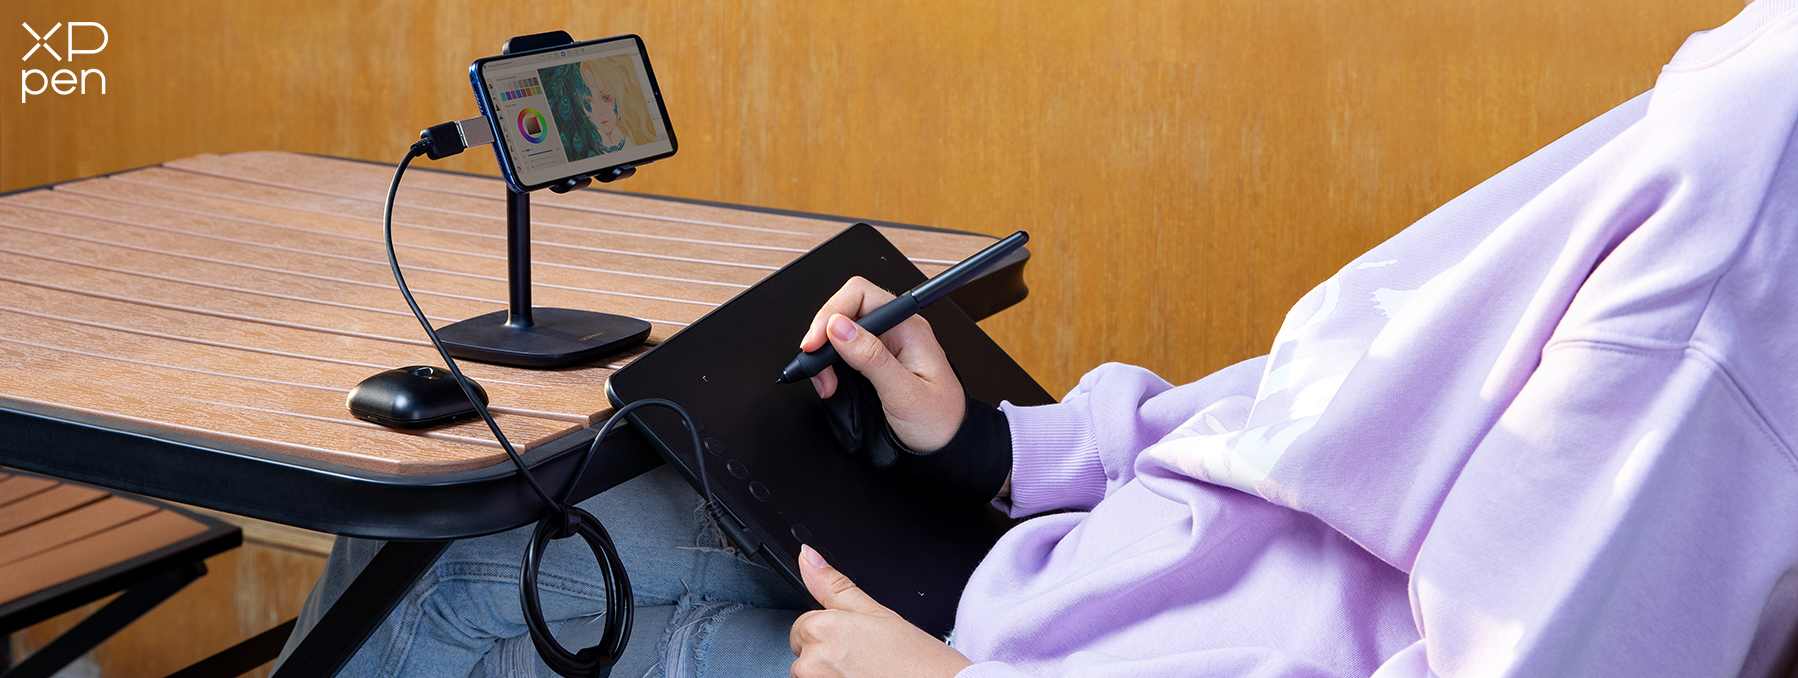 drawing tablet connect to android phone